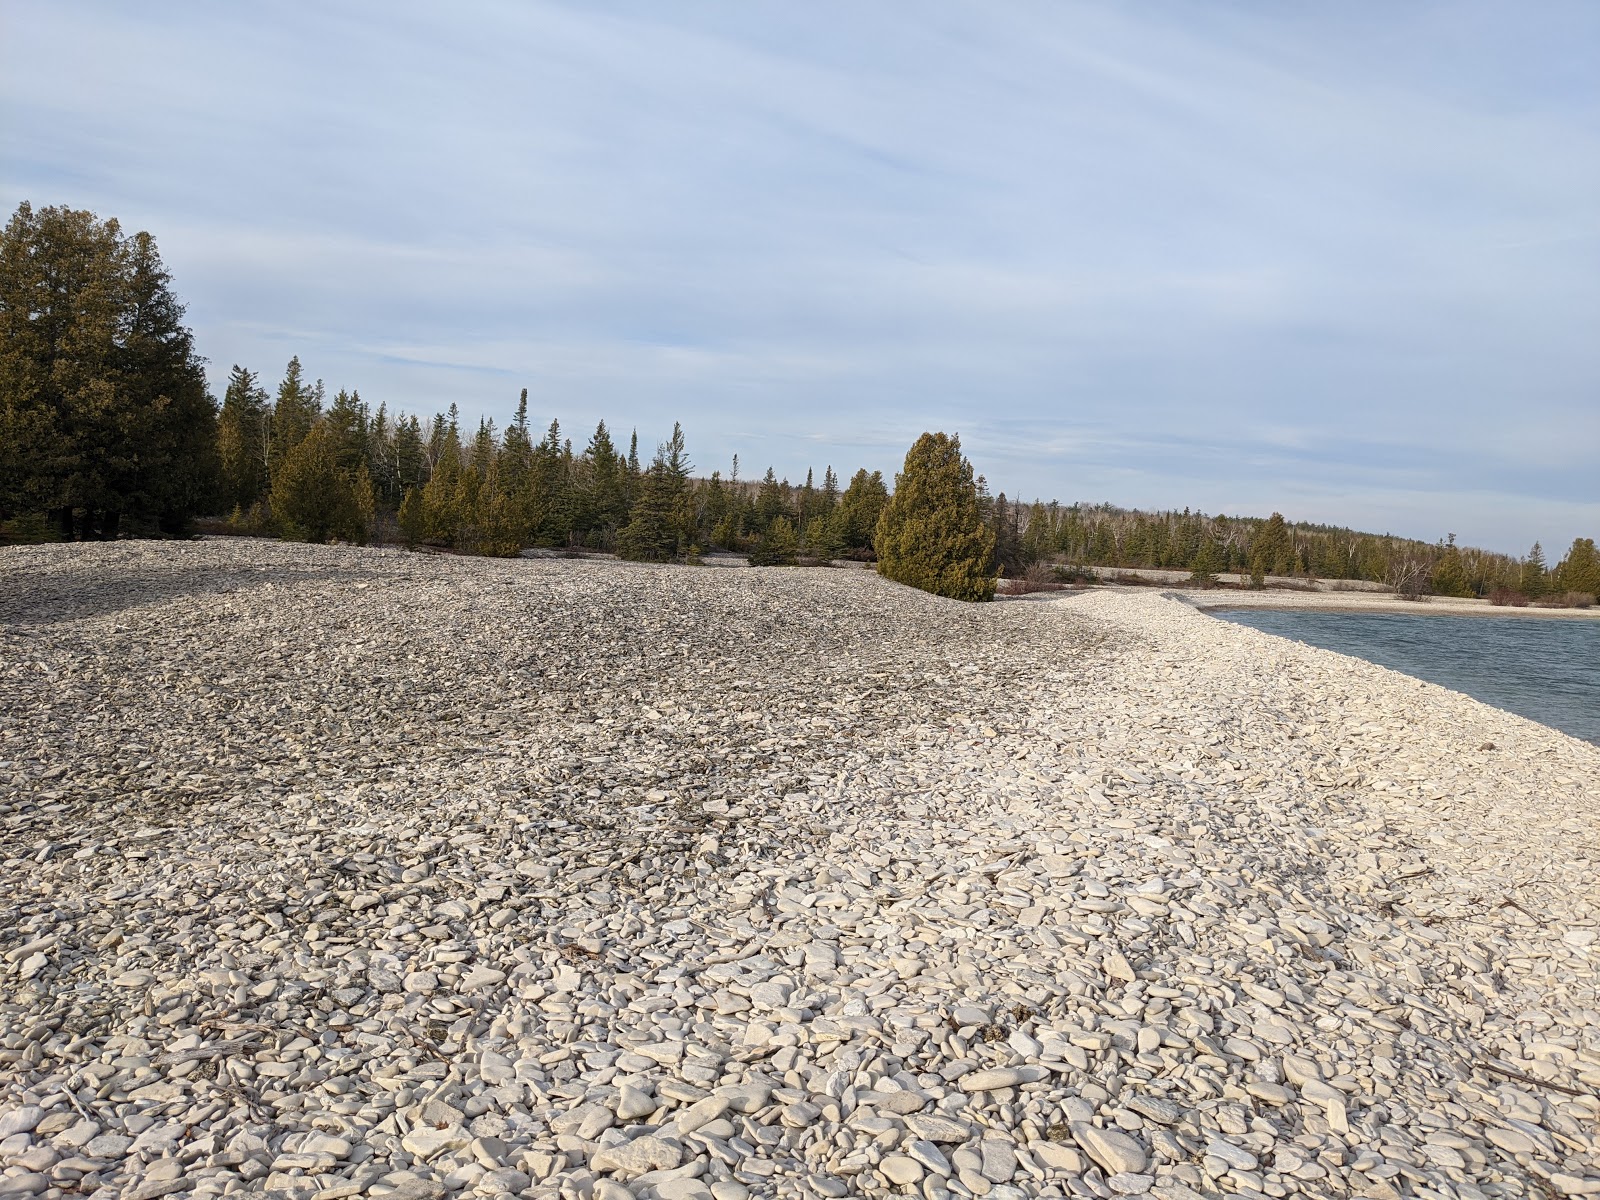 Photo of Shale Beach located in natural area